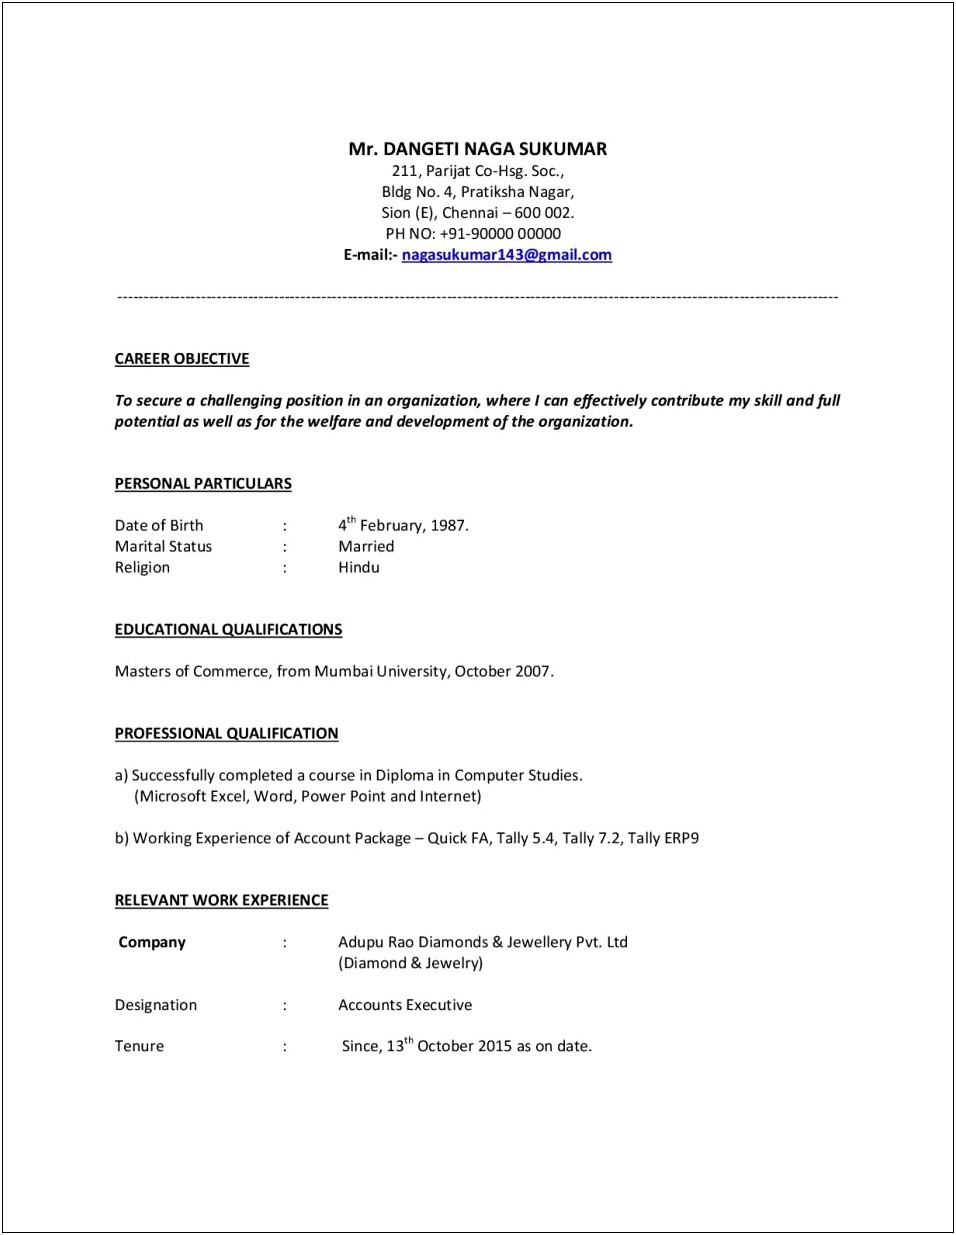 Resume Headline For Assistant Manager Accounts